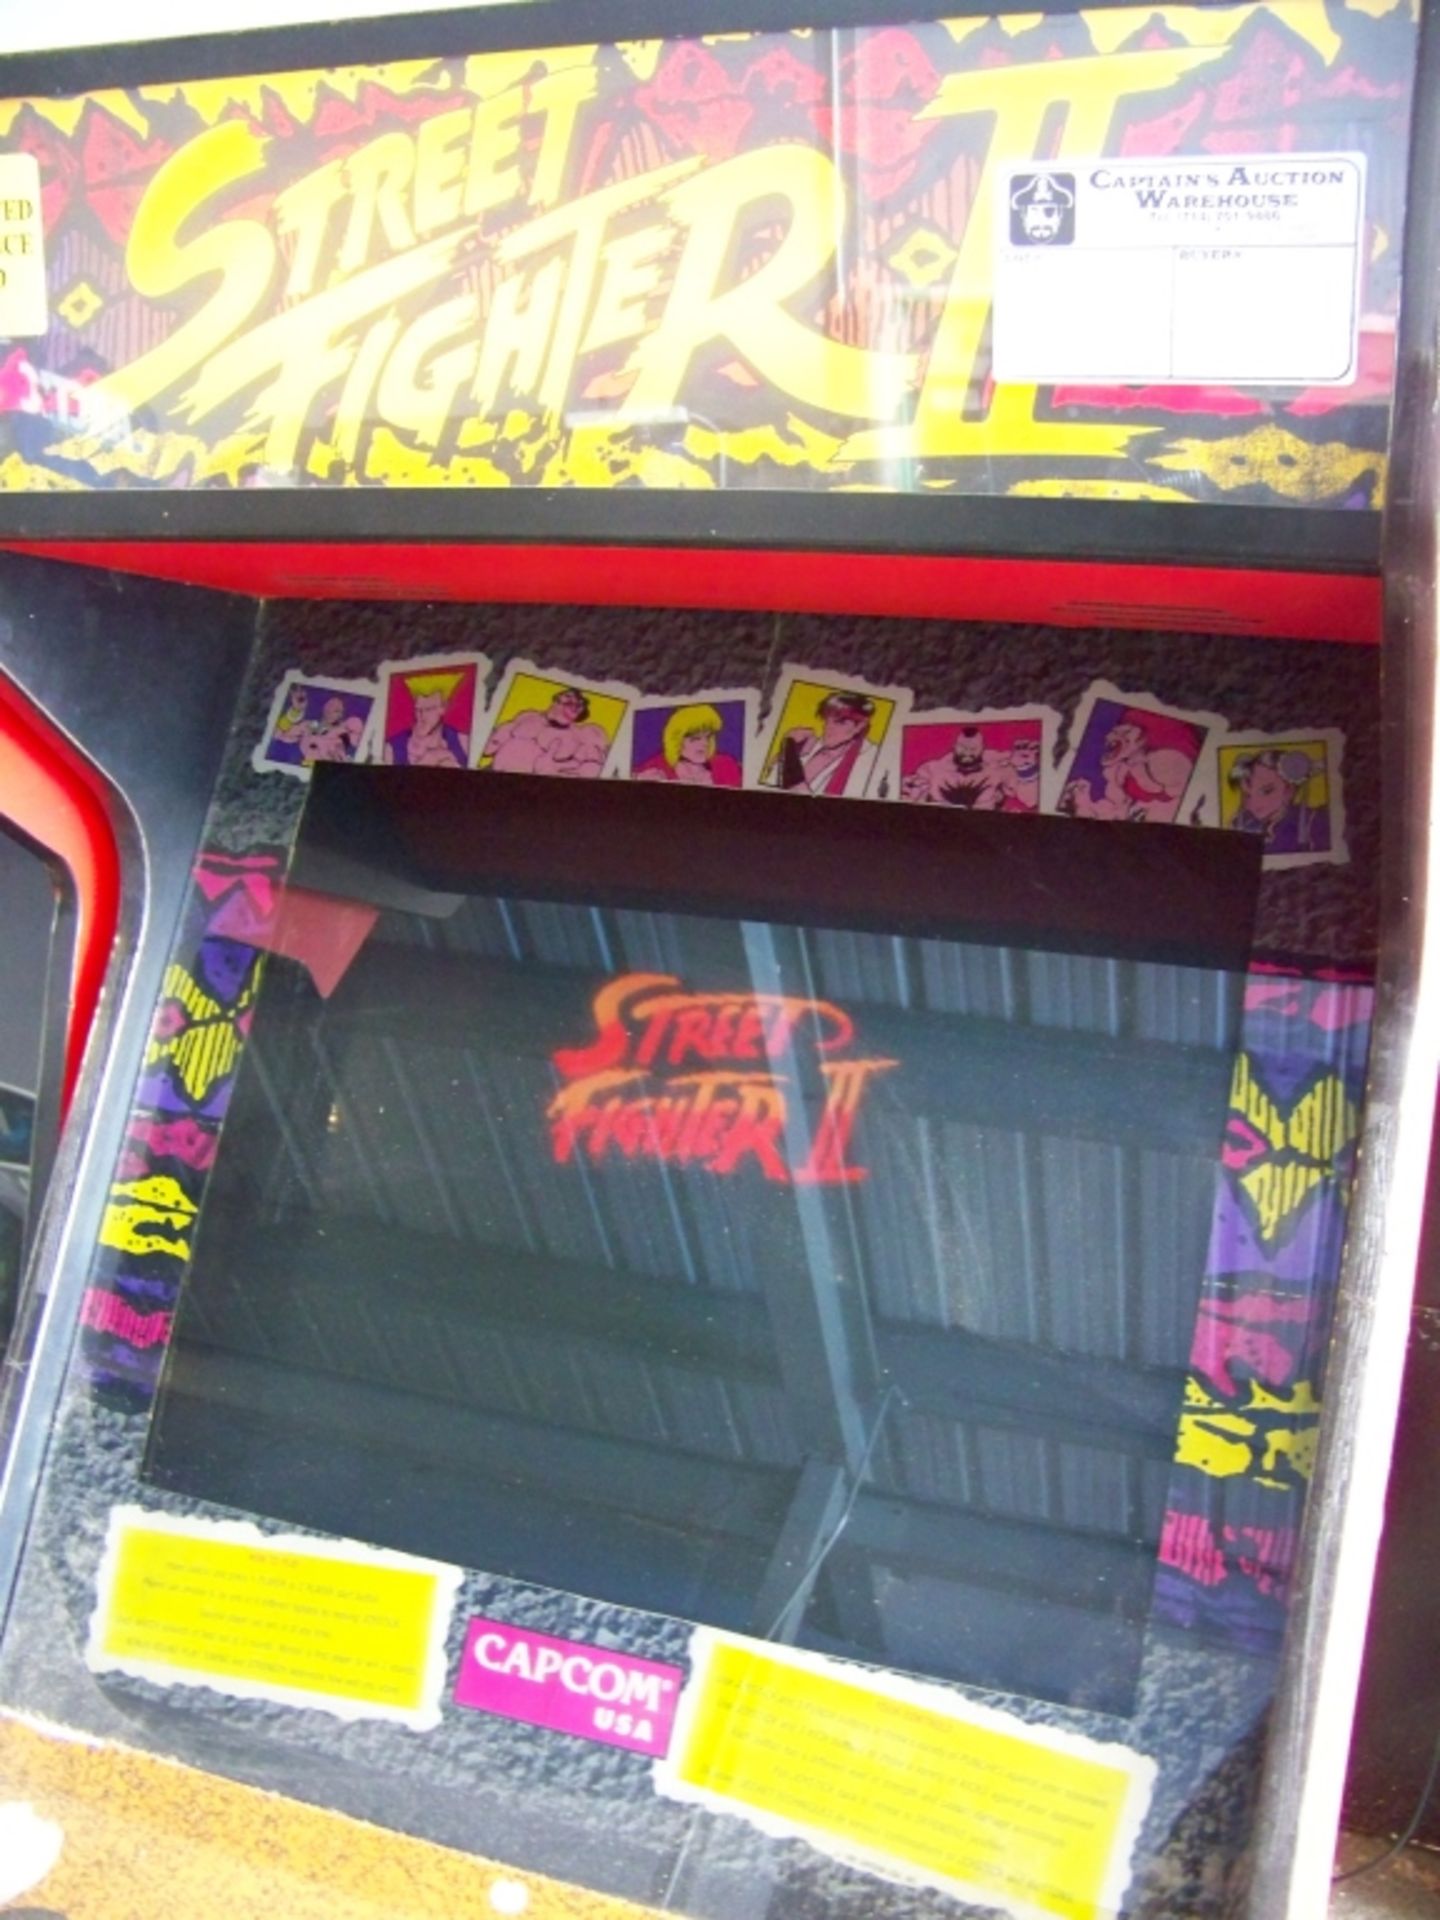 STREET FIGHTER II CAPCOM ARCADE GAME Item is in used condition. Evidence of wear and commercial - Image 4 of 4